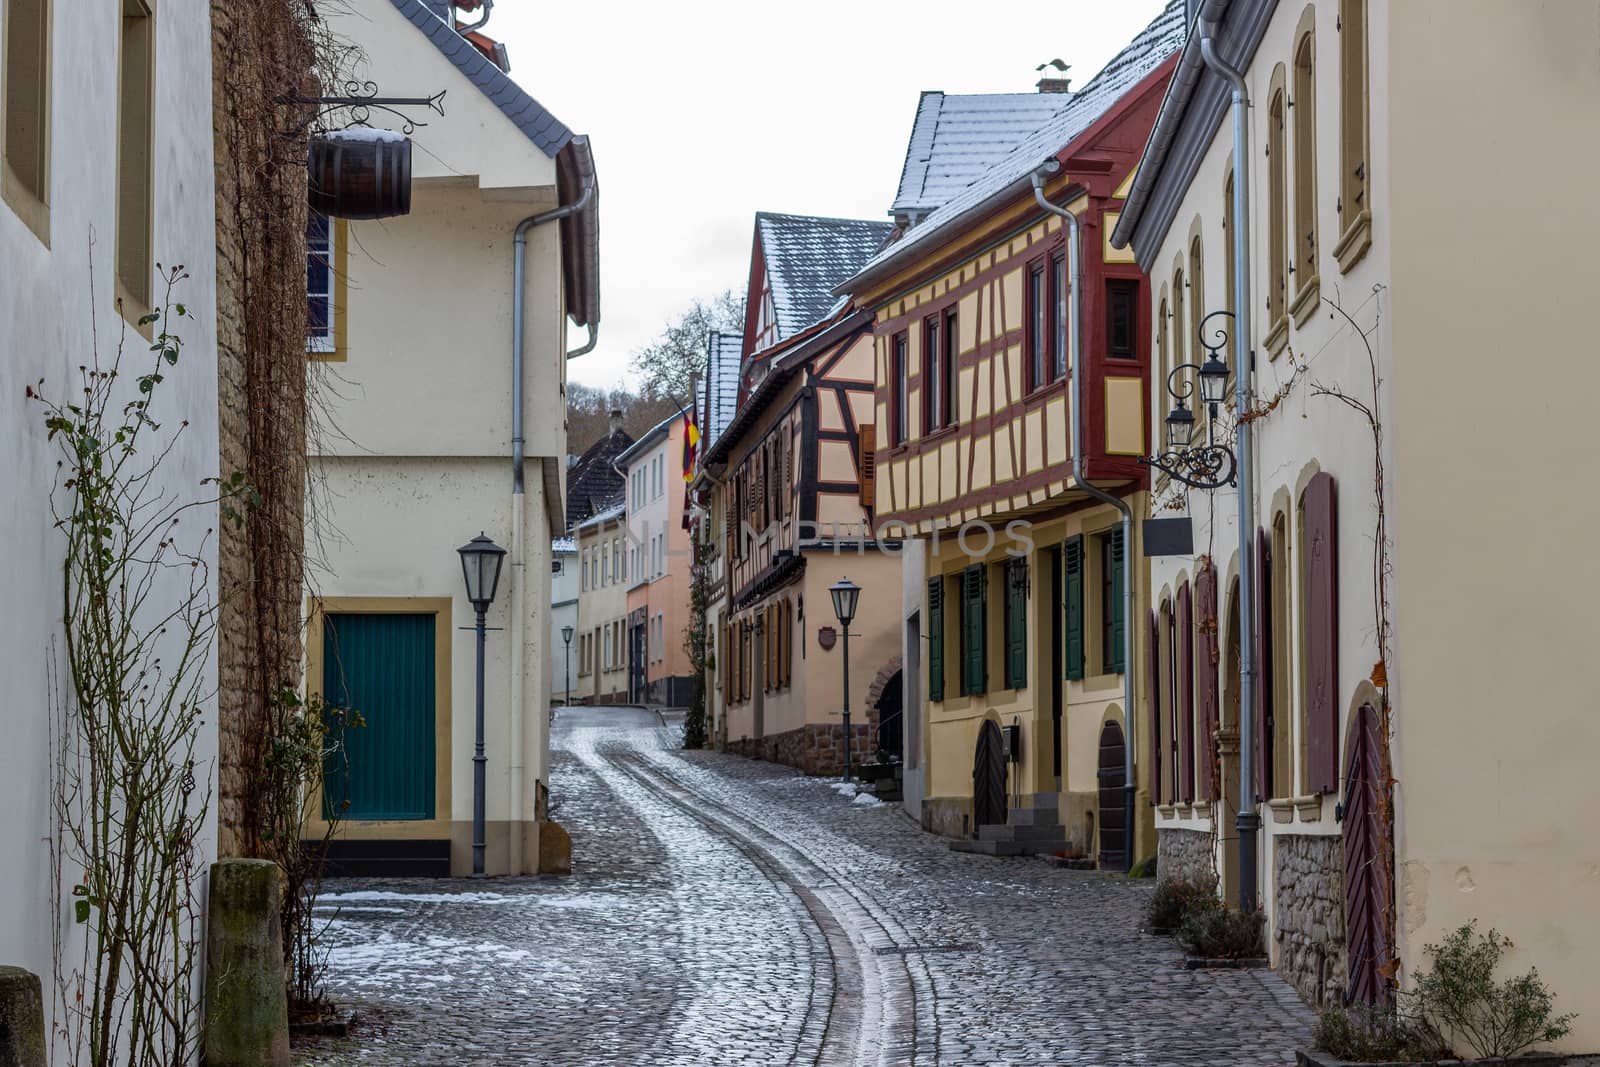 Cobbled alley with half-timbered houses in the city Meisenheim, Germany in winter